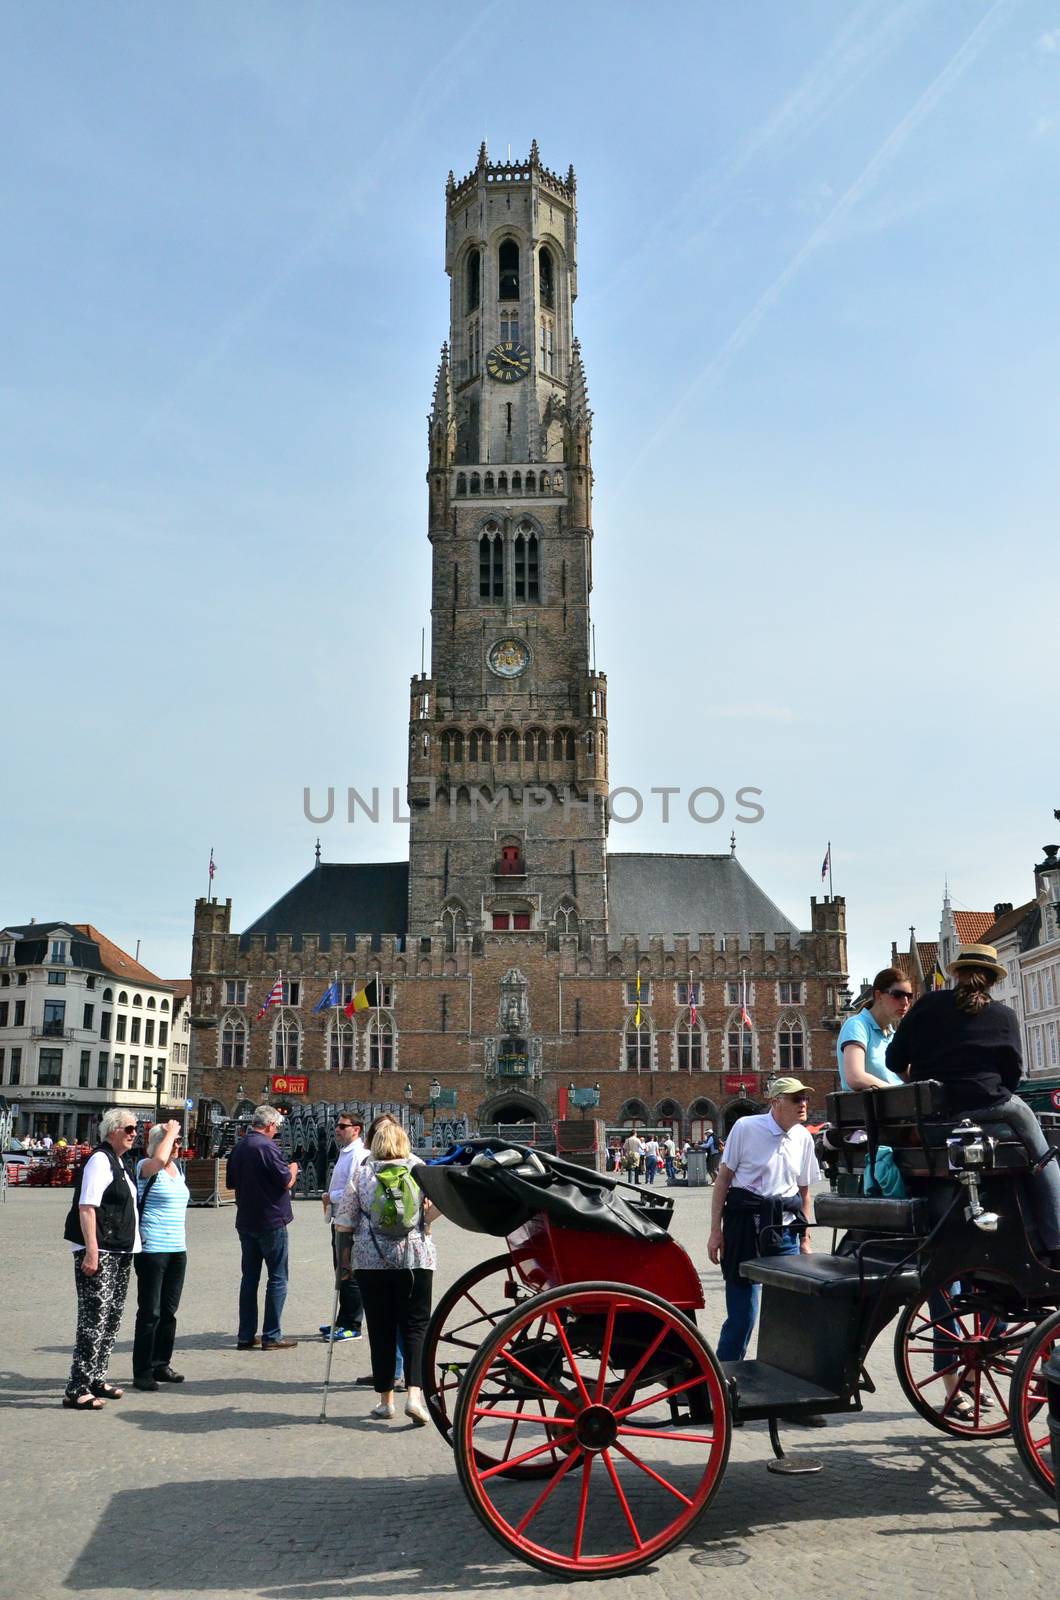 Bruges, Belgium - May 11, 2015: Tourist visit Belfry of Bruges on Grote Markt square by siraanamwong